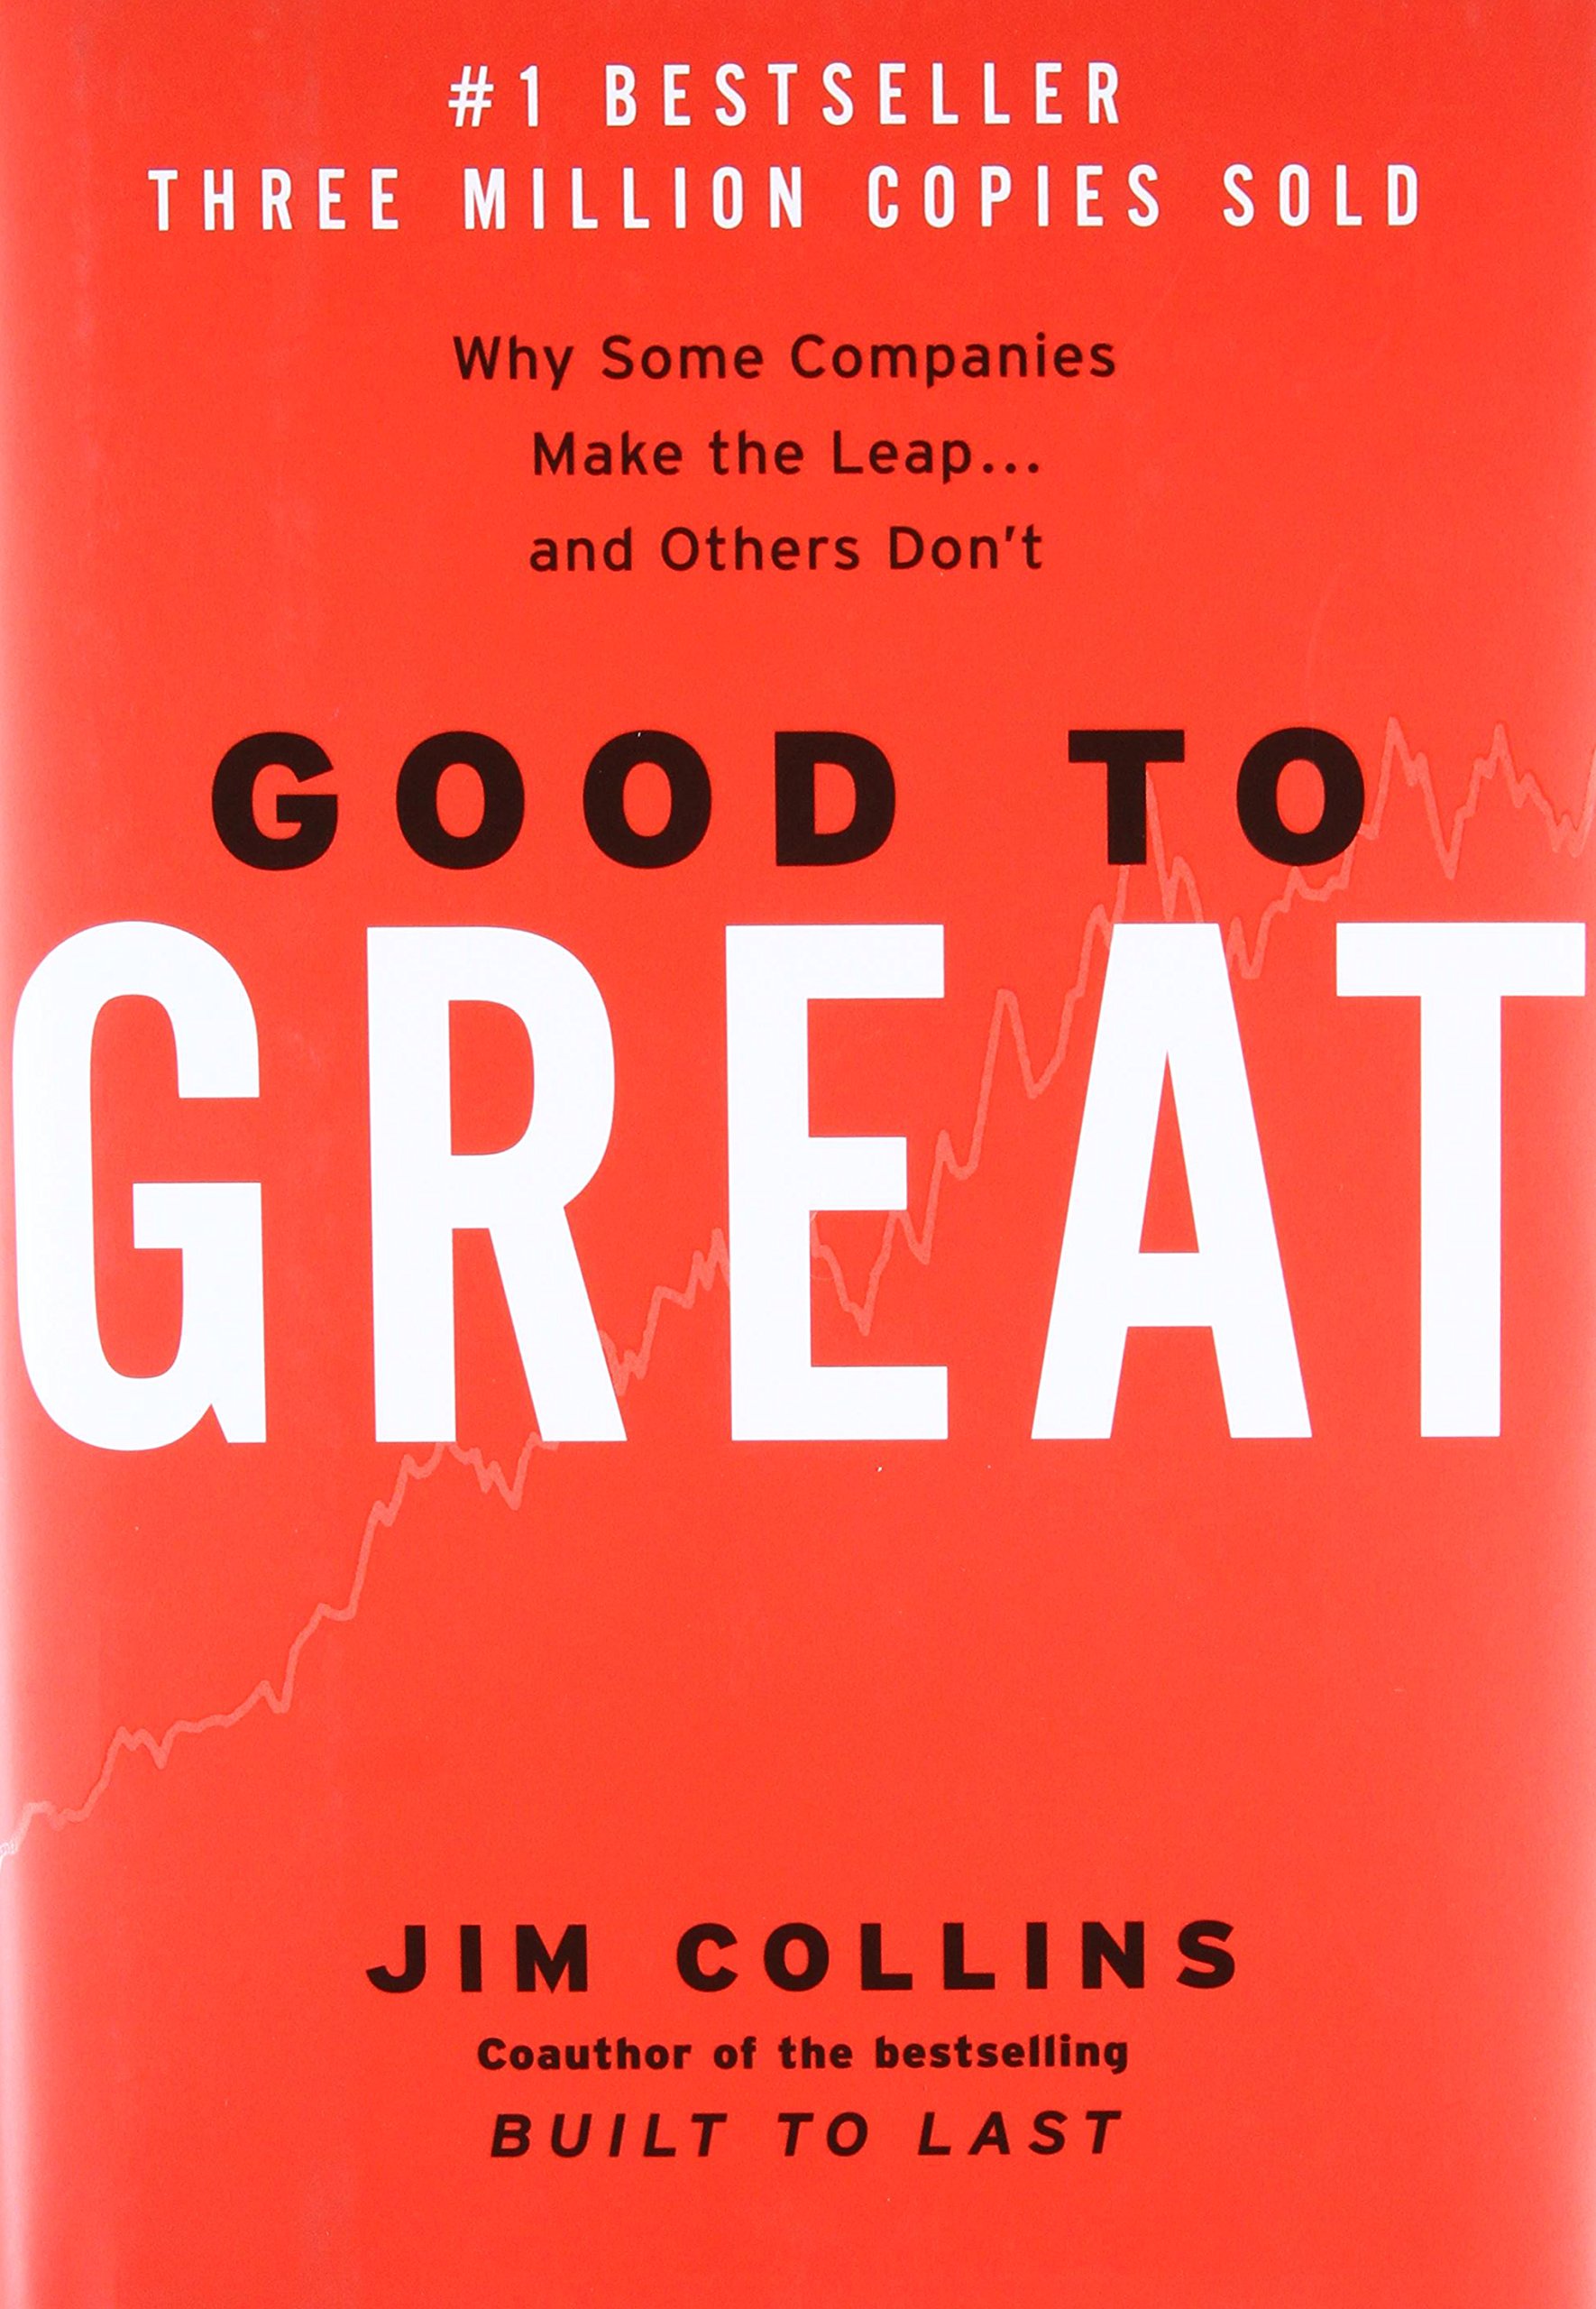 The book cover for Good to Great.